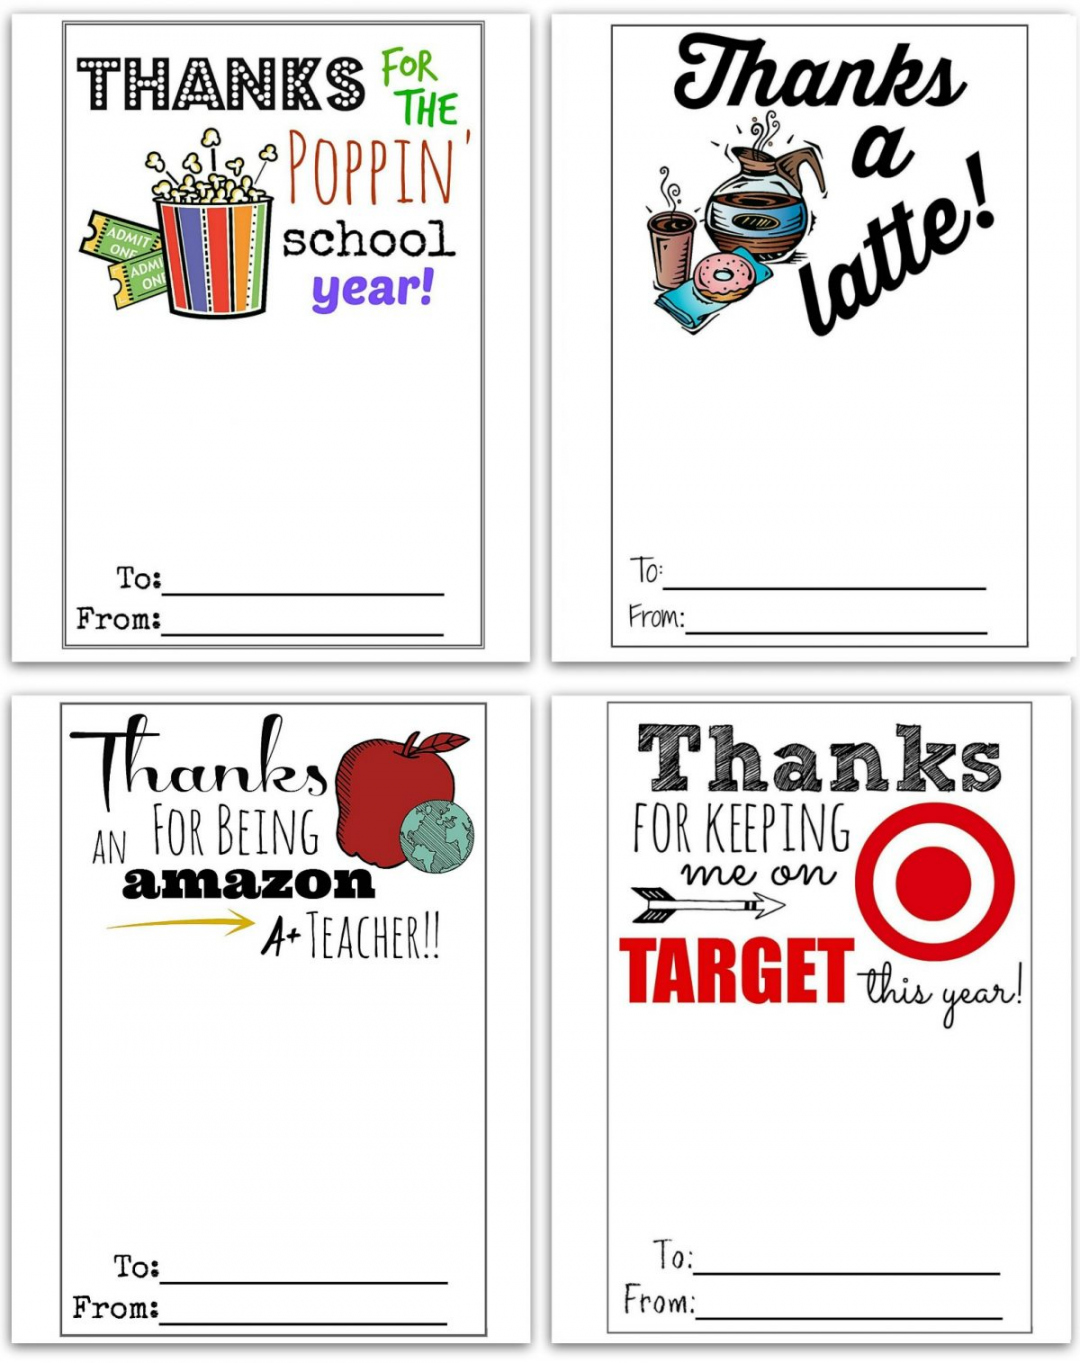 Teacher Appreciation Cards Free Printable - Printable - FREE Printable Gift Card Holders for Teacher Gifts